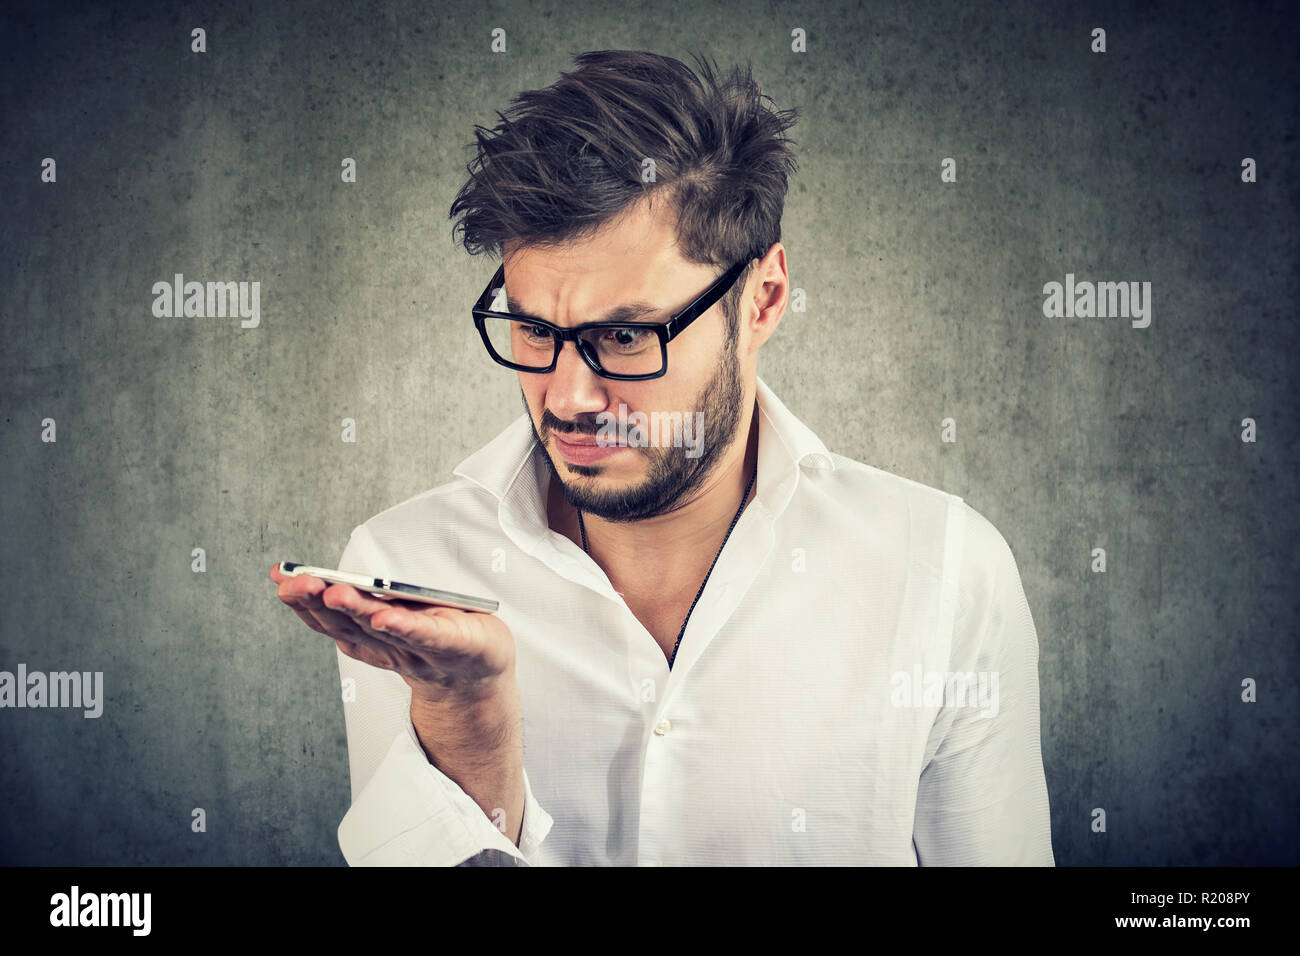 Young bearded man in shirt holding smartphone being upset with voice command function Stock Photo